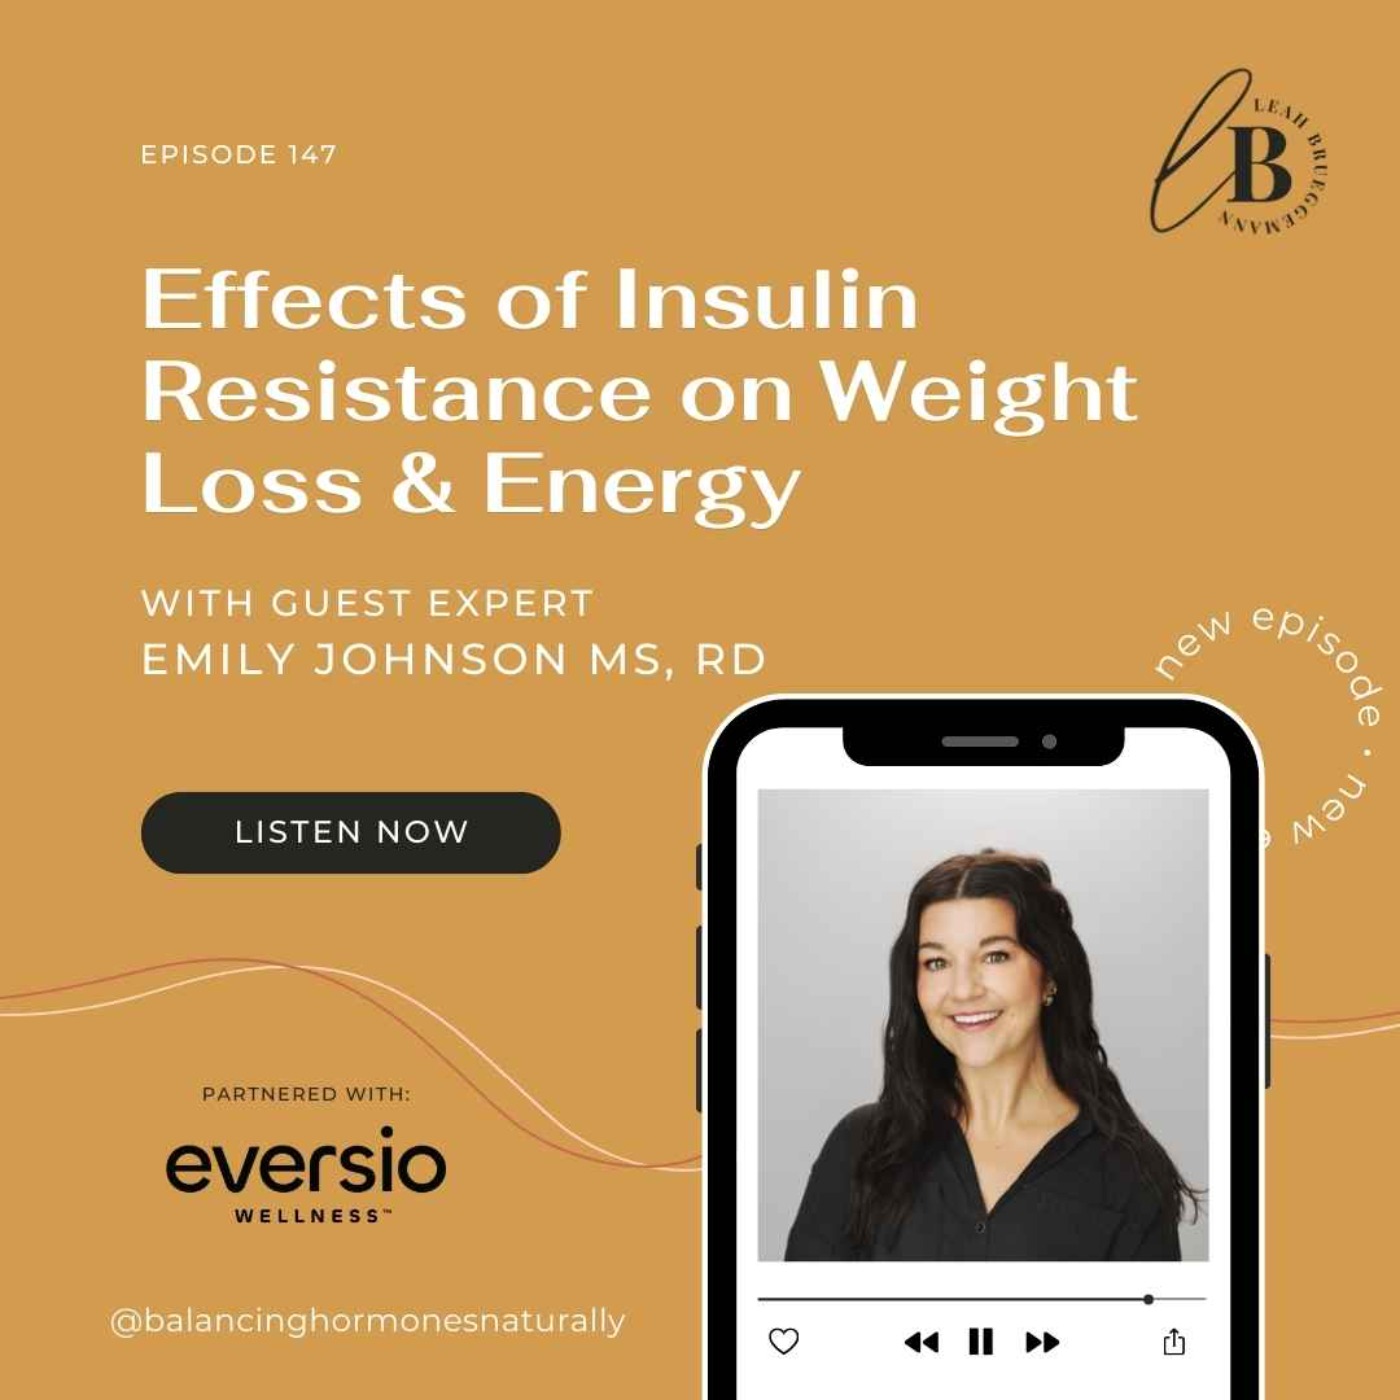 Episode 147: Effects of Insulin Resistance on Weight Loss & Energy